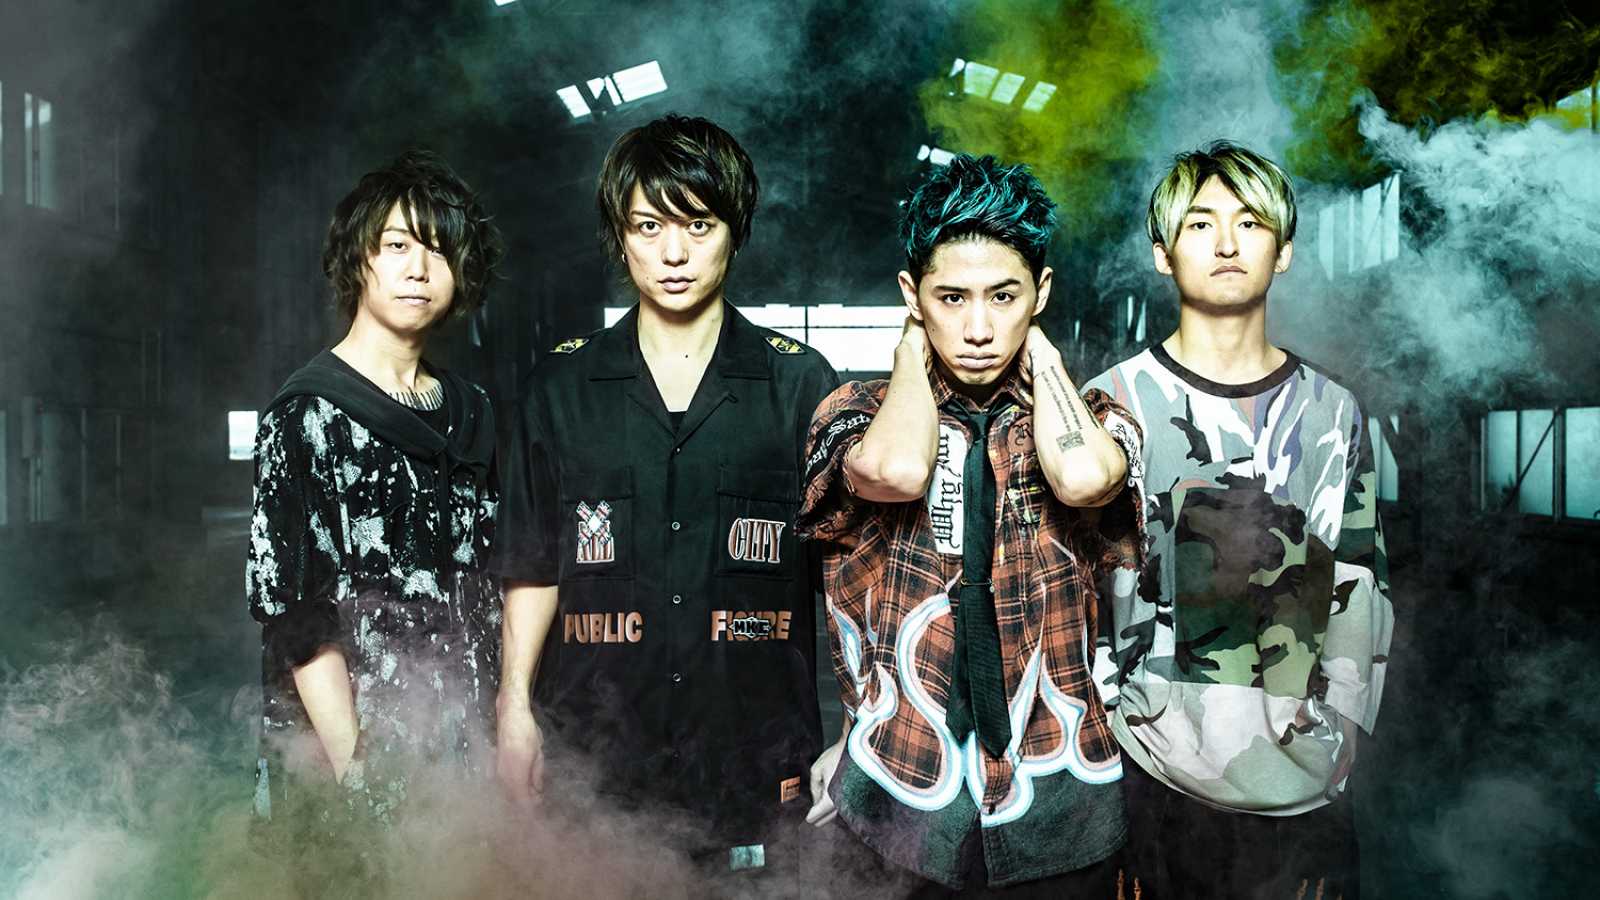 ONE OK ROCK diffuse sur YouTube ses anciens concerts © AMUSE INC. All rights reserved.